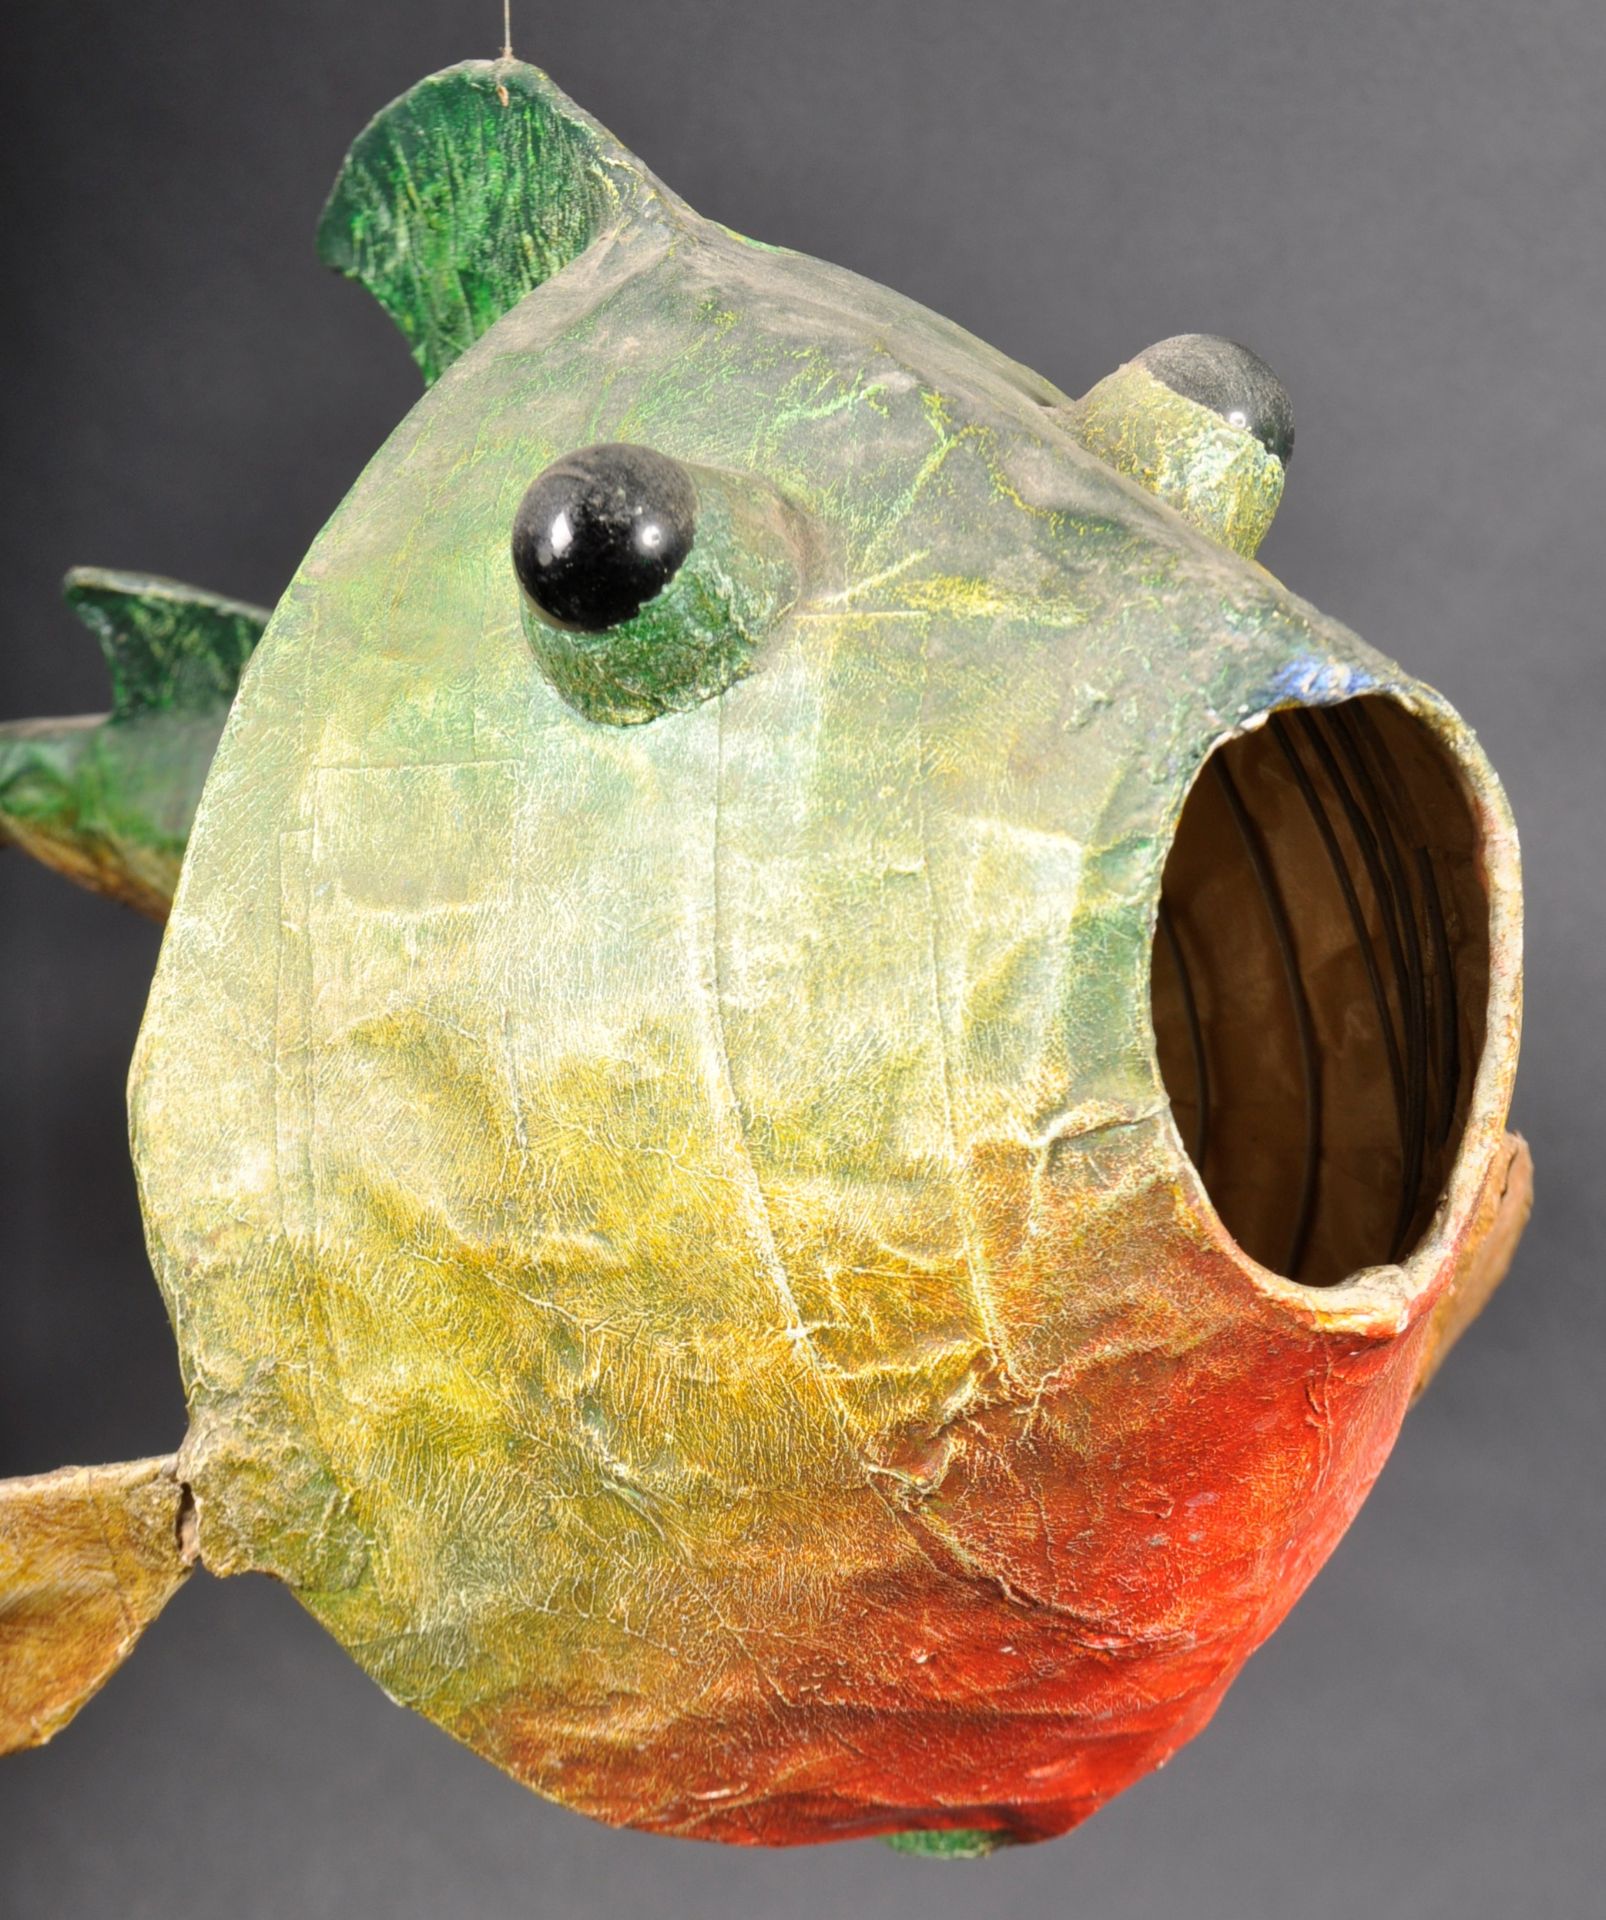 RETRO PAPIER-MACHE AND WIRE ABSTRACT MODEL OF A FISH - Image 2 of 11